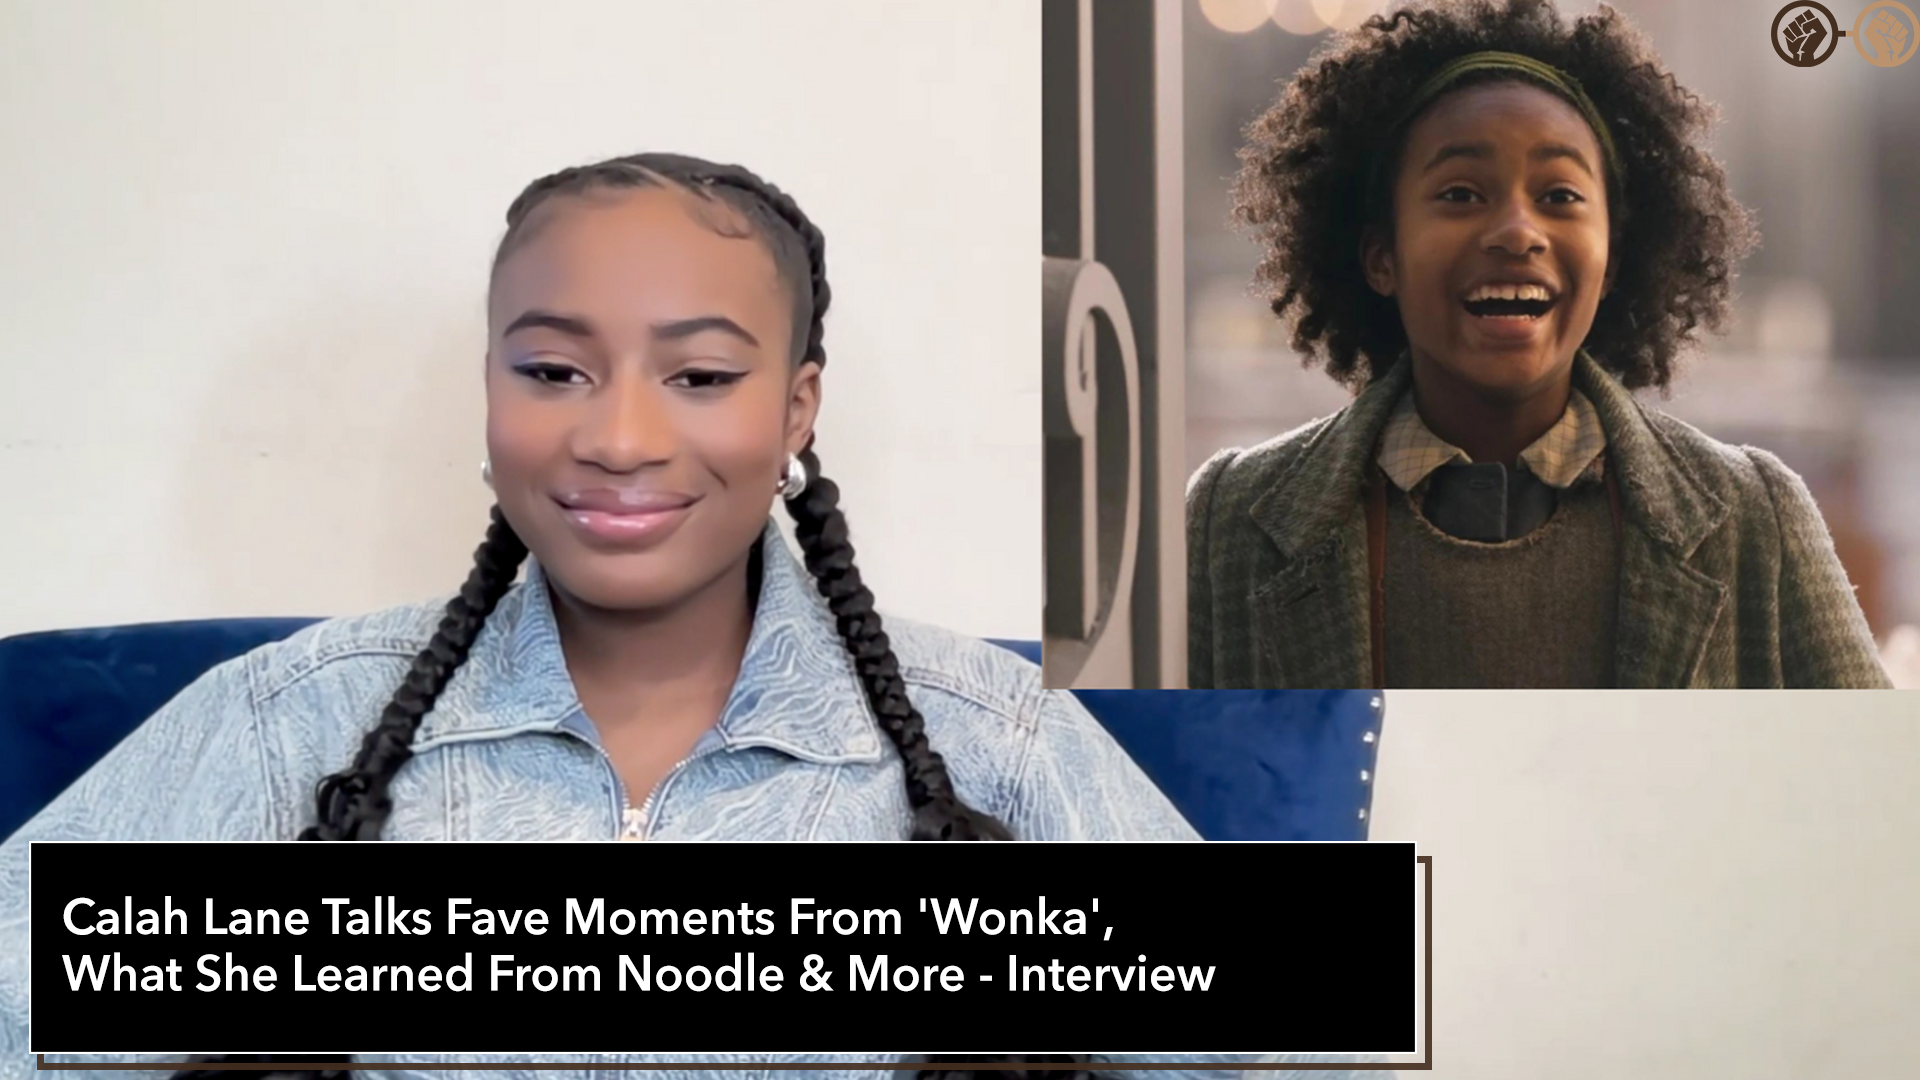 Calah Lane Talks Fave Moments From ‘Wonka’, What She Learned From Noodle & More – Interview